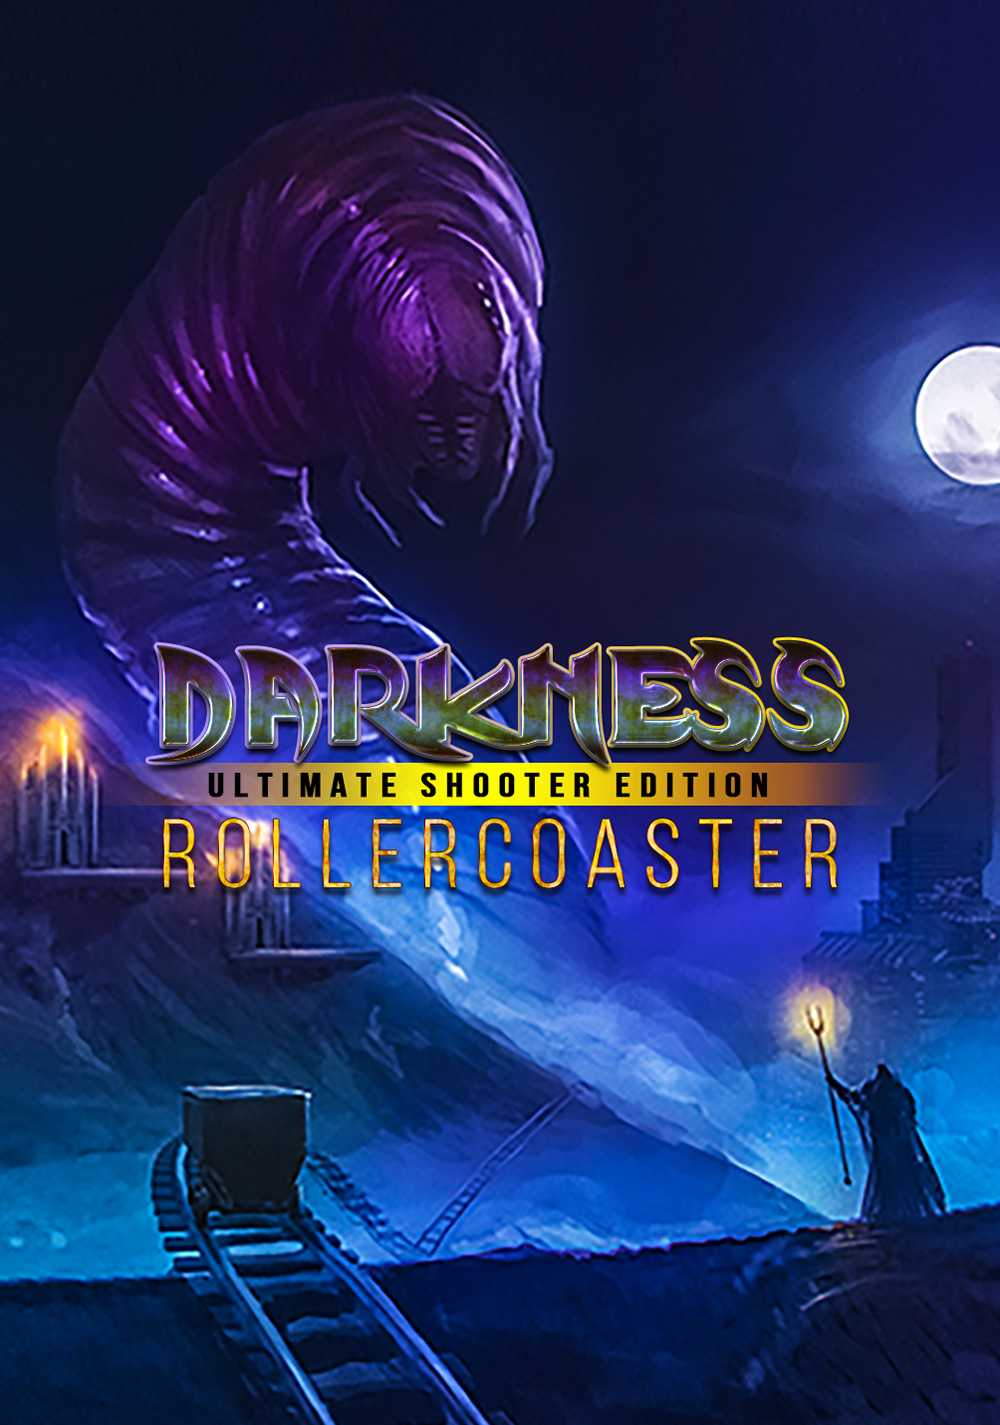 Darkness Rollercoaster - Ultimate Shooter Edition (PC) Klucz Steam